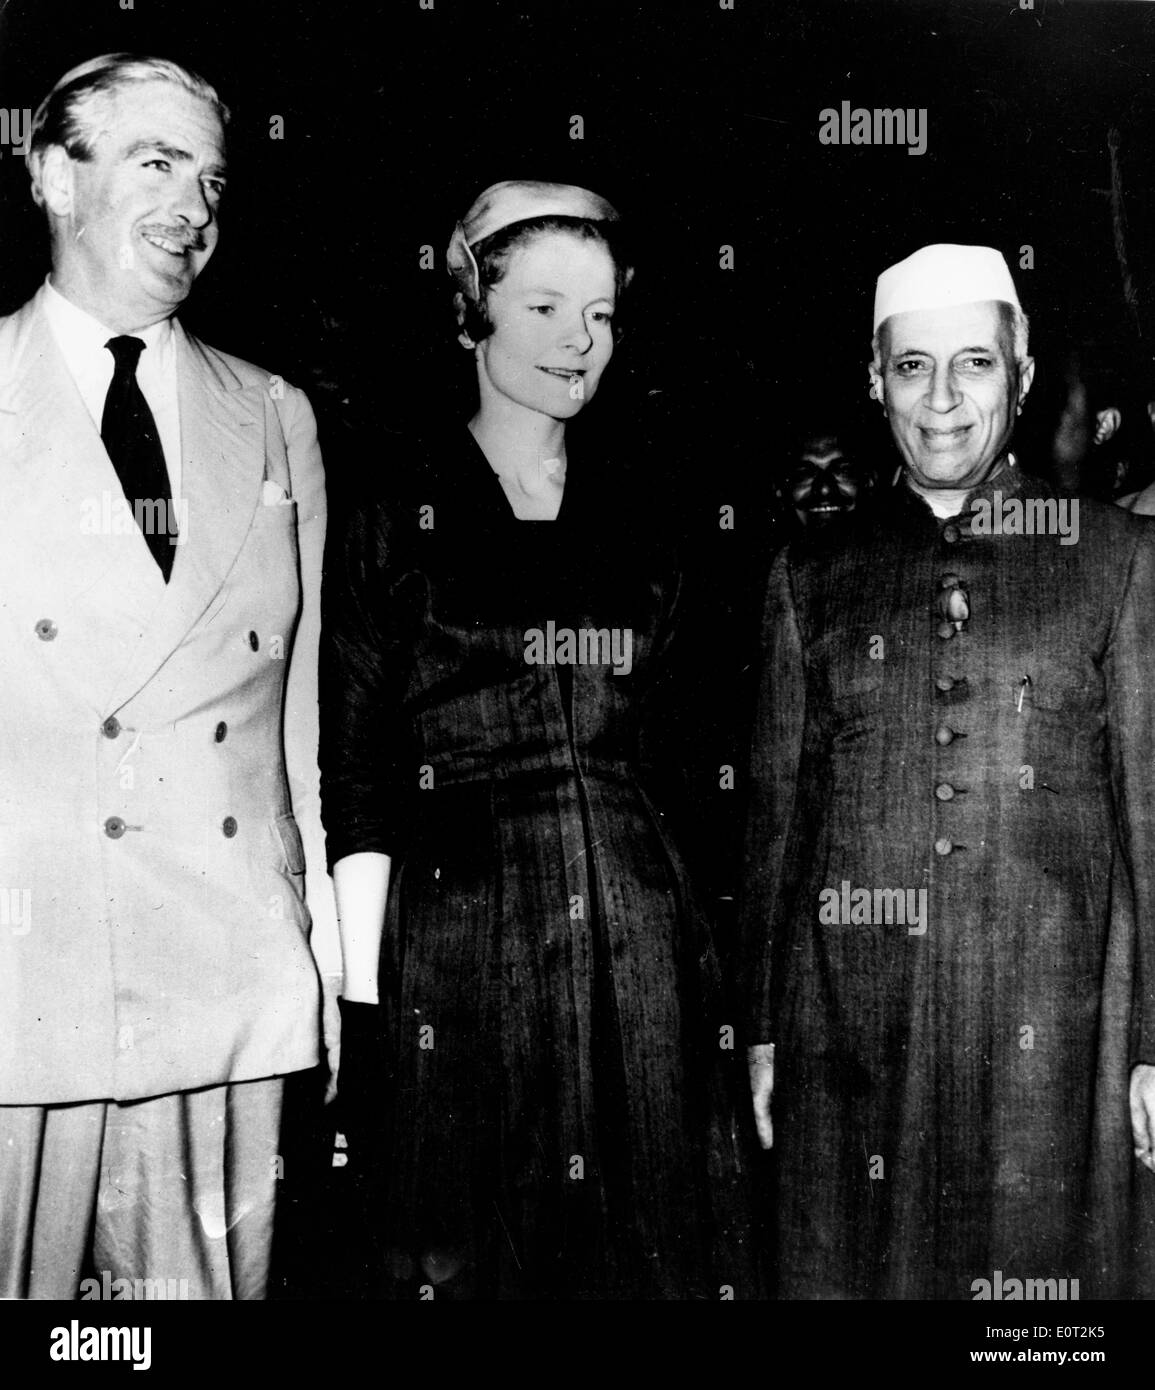 Prime Minister's Anthony Eden and Jawaharlal Nehru Stock Photo